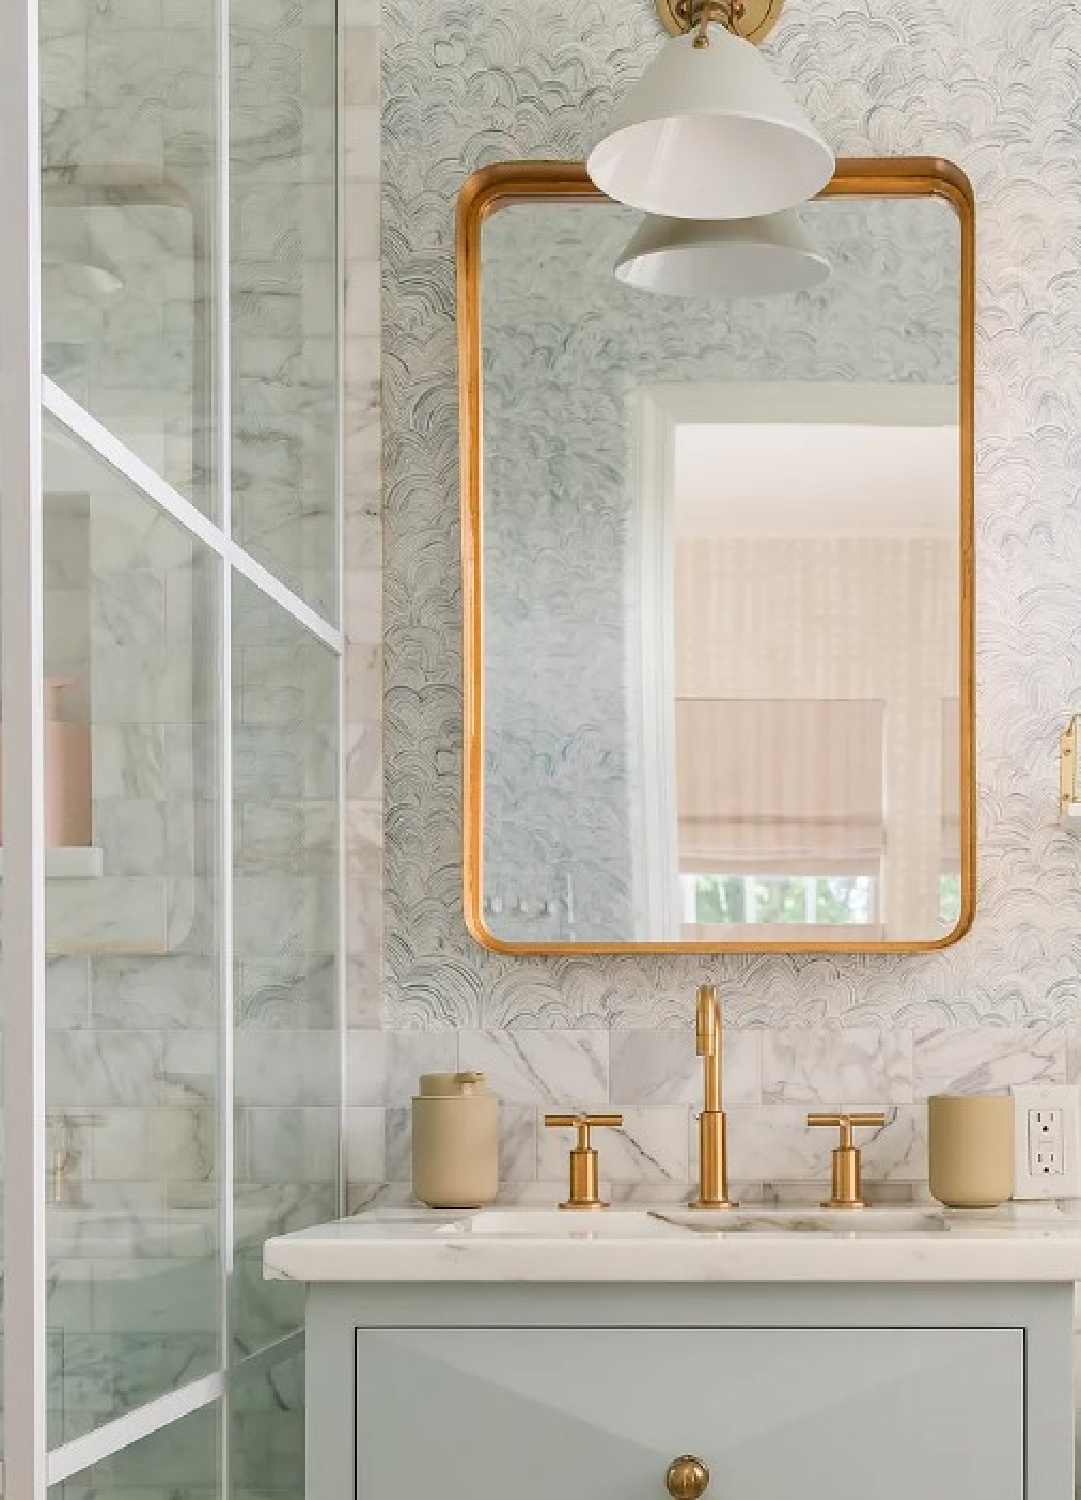 Marble bath in Kate Marker's 1920 white stucco Barrington Hills Home (160 N. Buckley Rd) with modern, serene, unfussy, timeless interiors. #katemarkerinteriors @thedawnmckennagroup #katemarkerhome